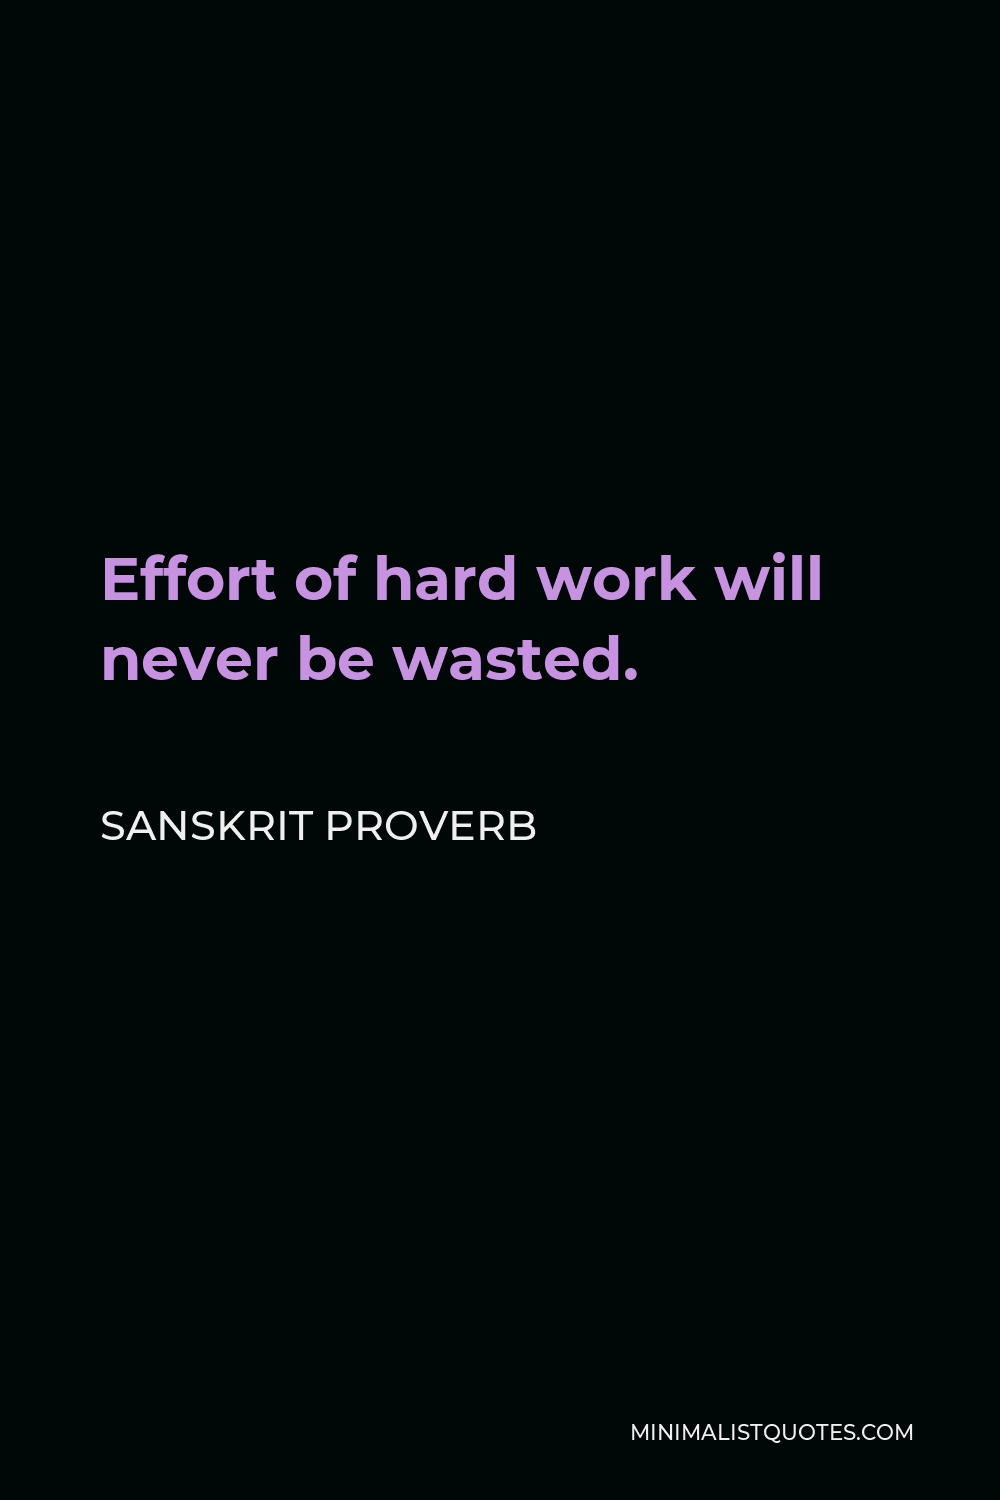 Sanskrit Proverb Quote - Effort of hard work will never be wasted.